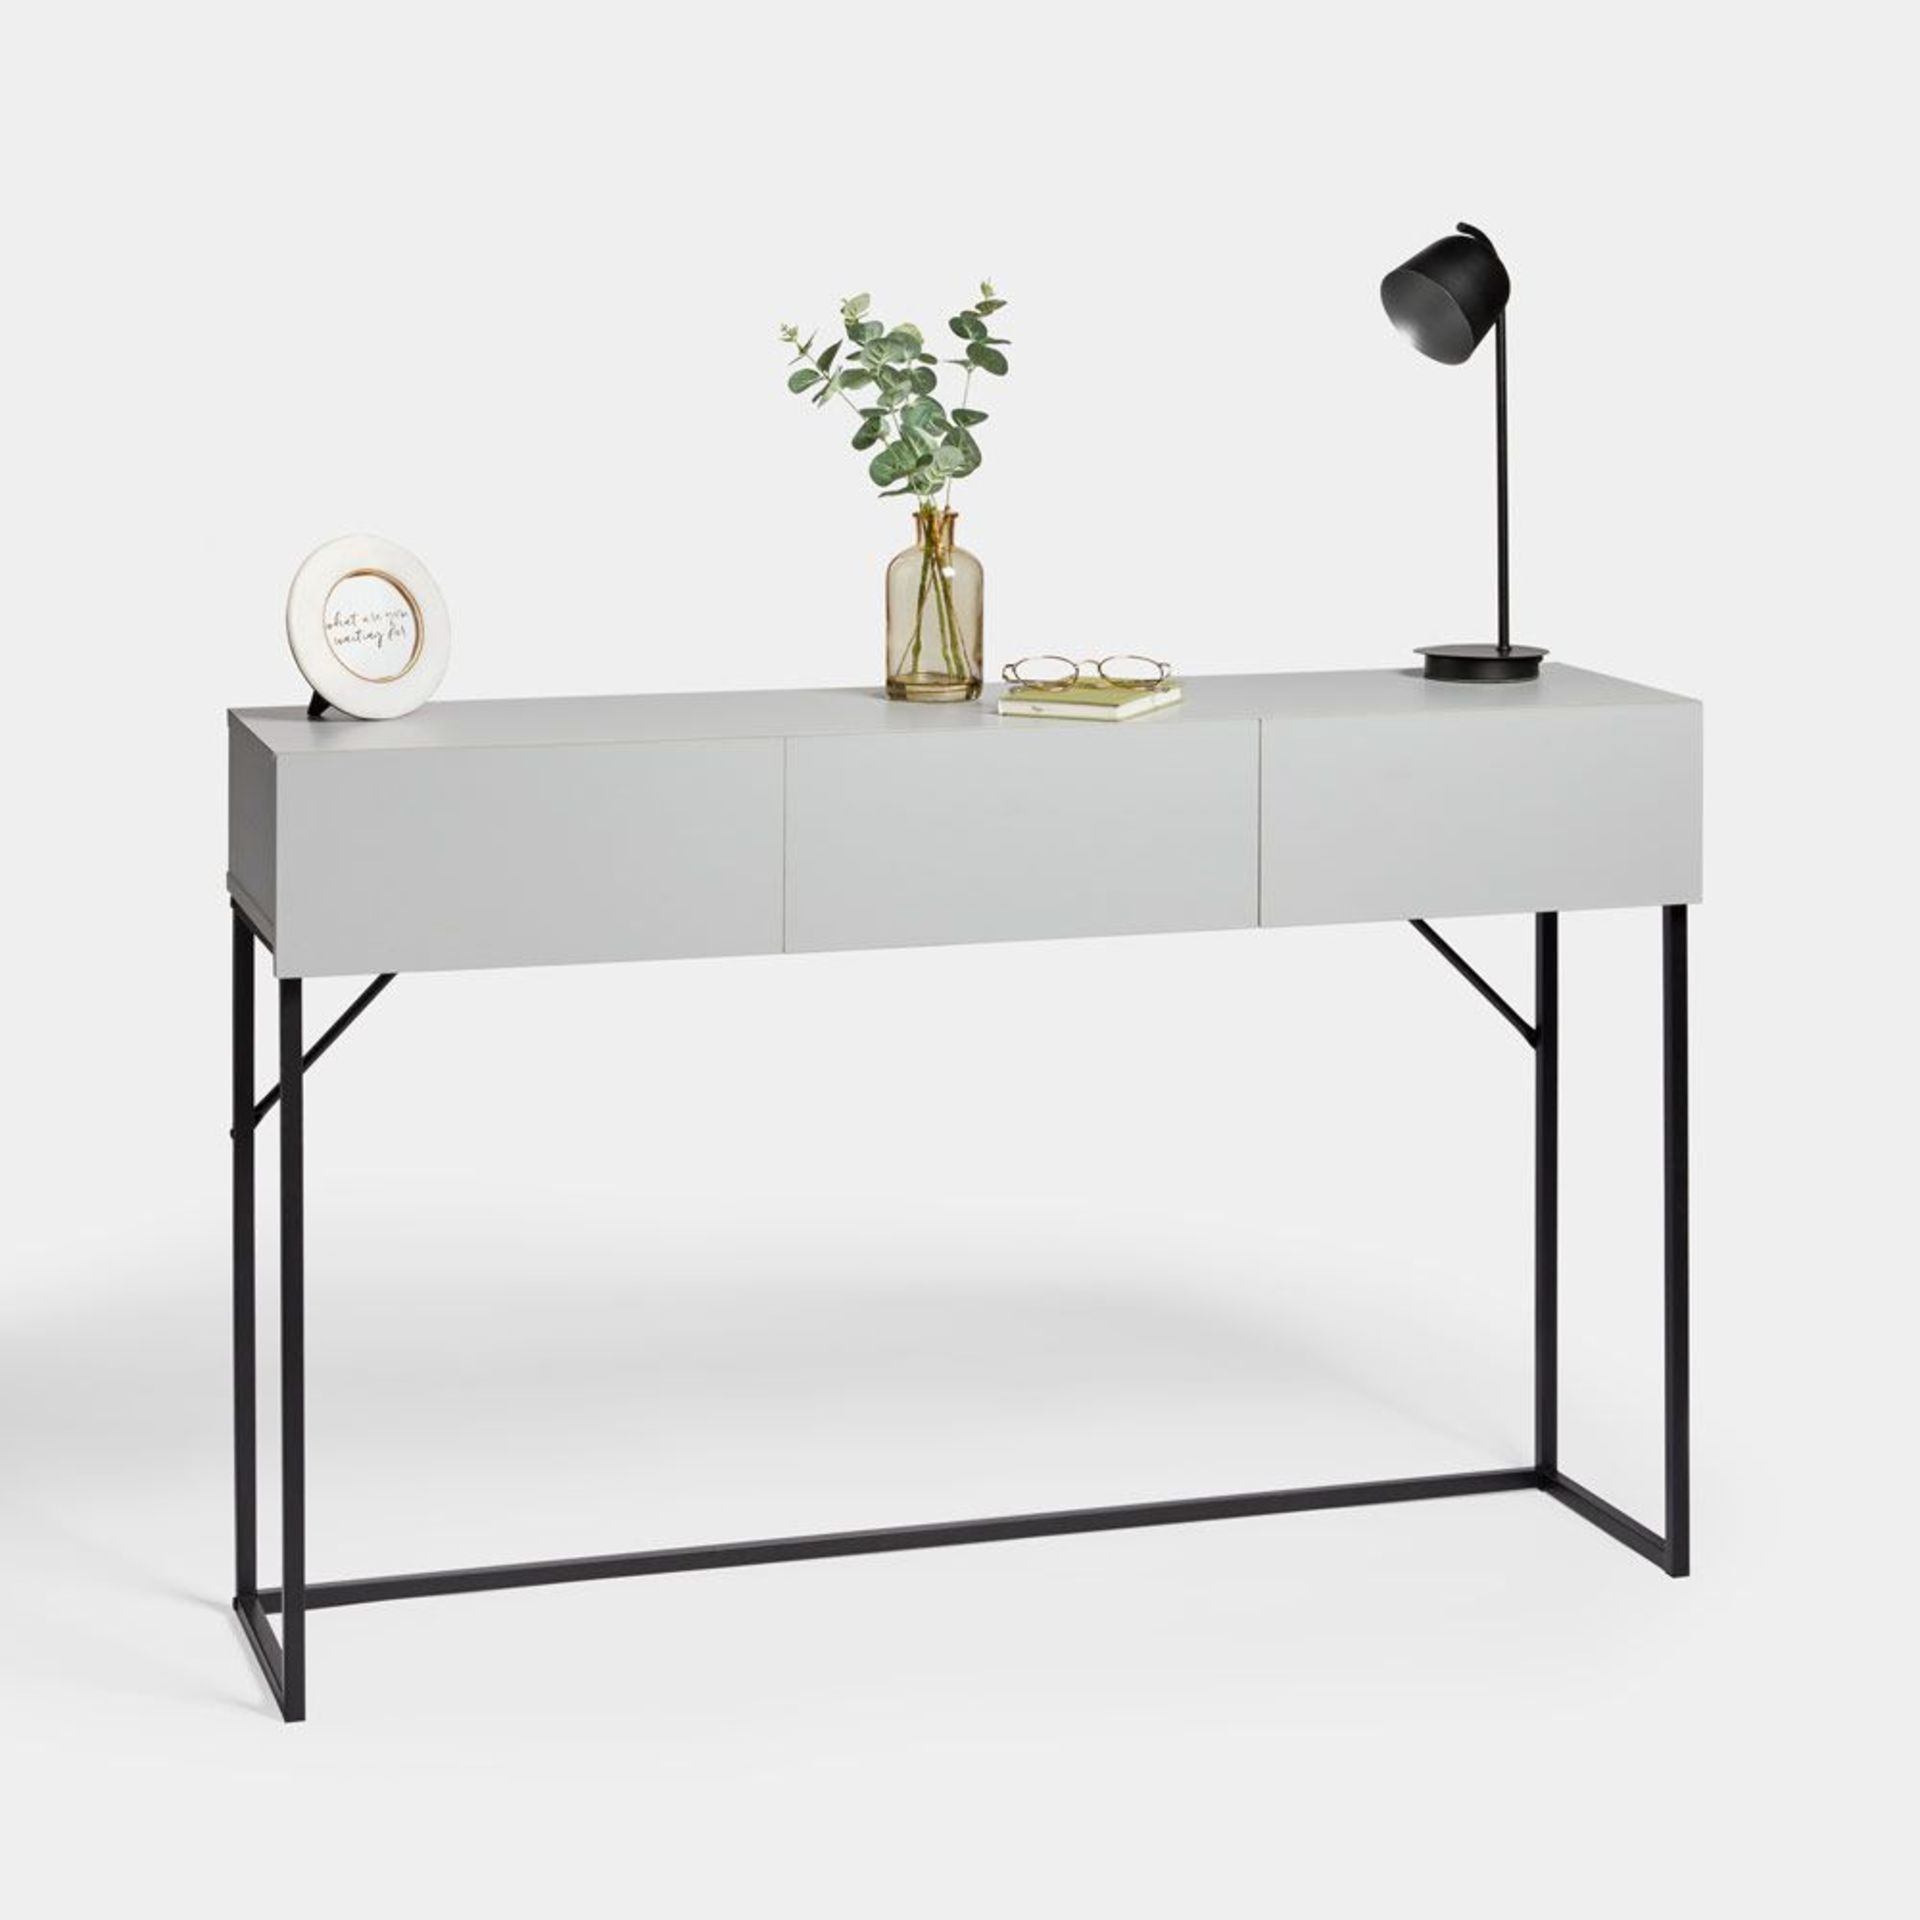 Oslo Grey Console Table. - BI. In a sleek grey colour, the Oslo console suits any home, décor or